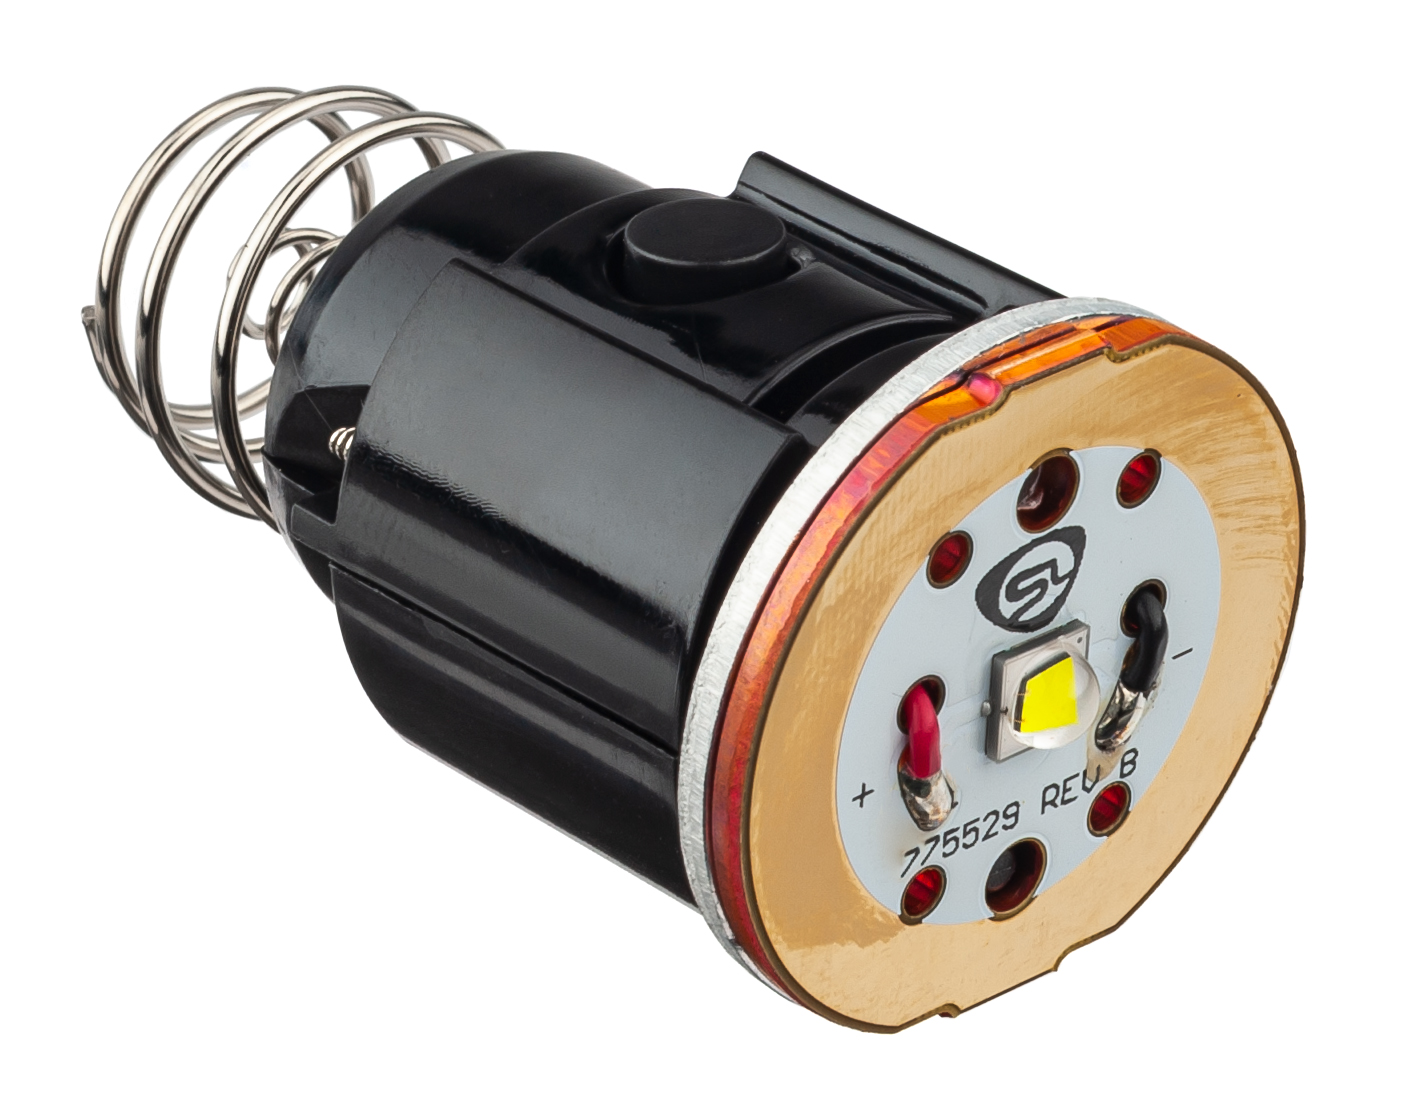 Streamlight Ultra Stinger LED Switch Assy Includes LED 16% Off w/ Free  Shipping and Handling